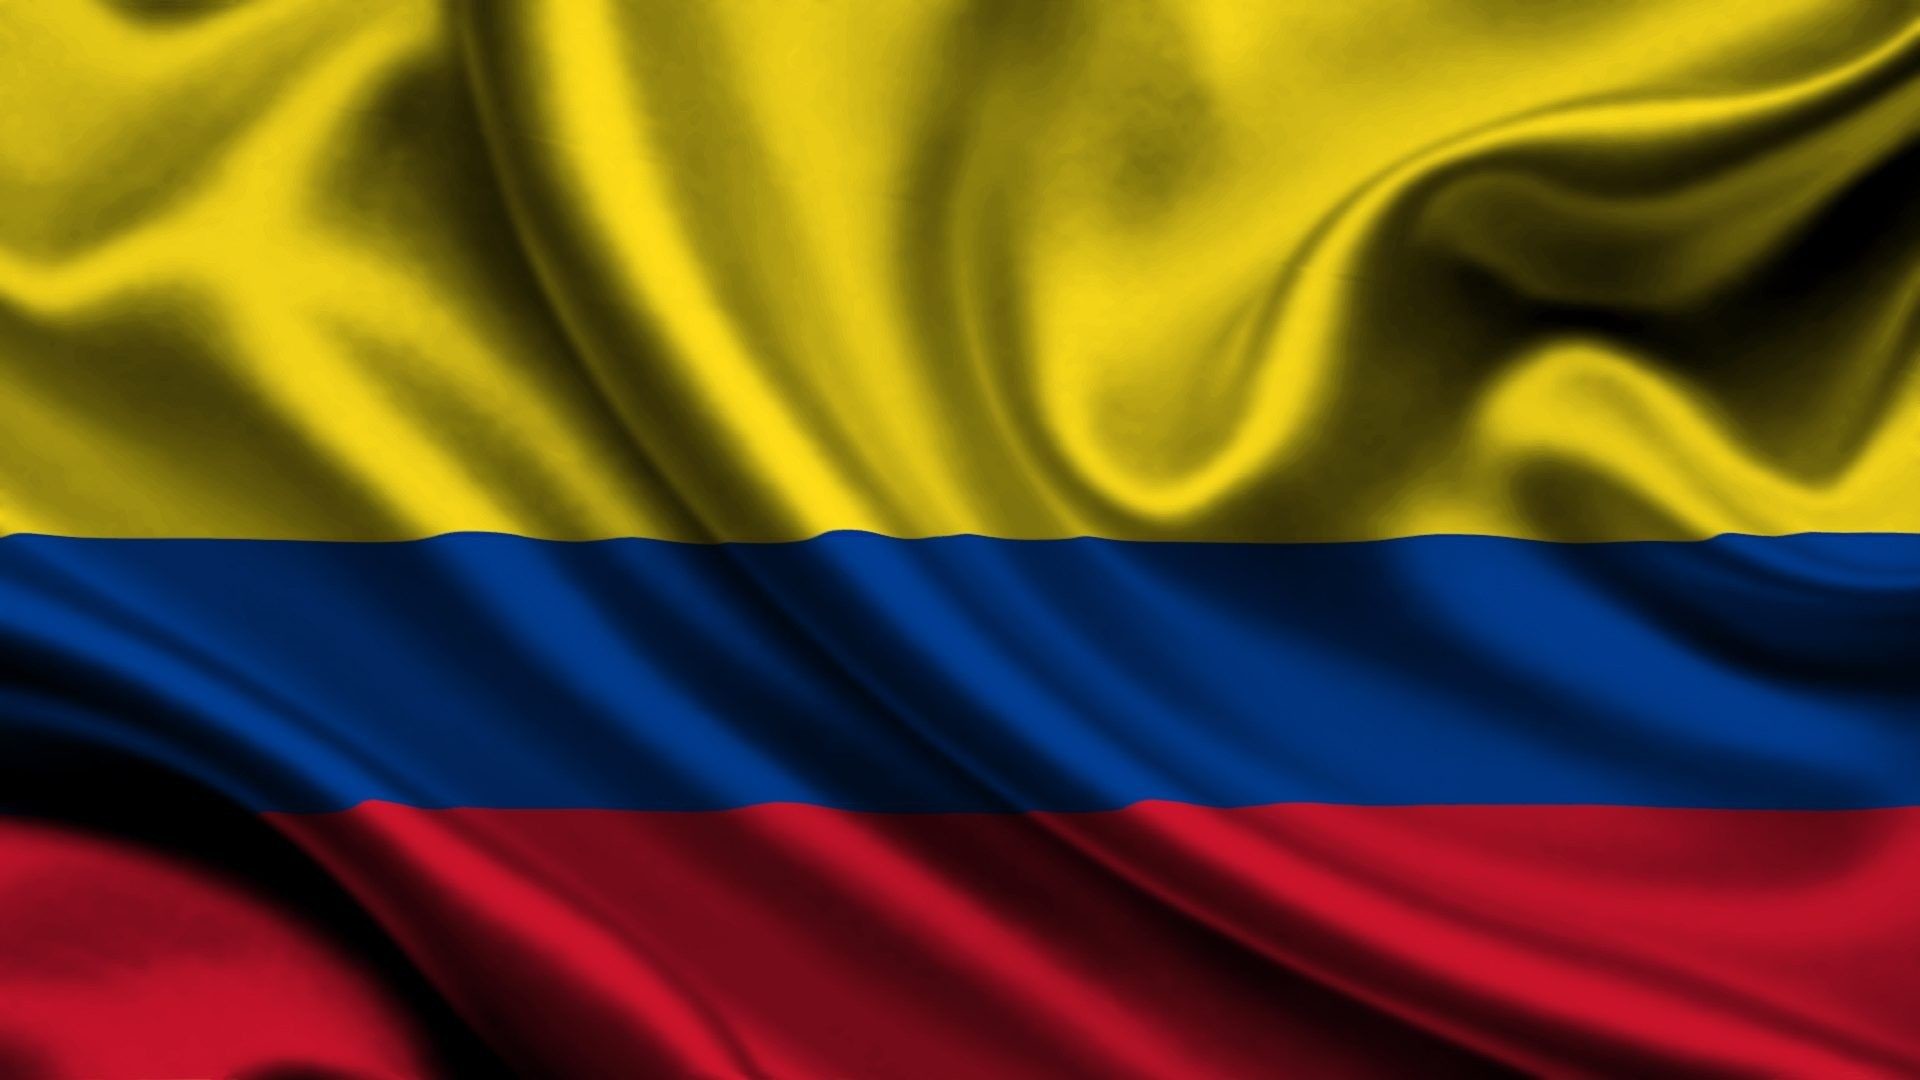 1920x1080 Flag of Colombia wallpaper